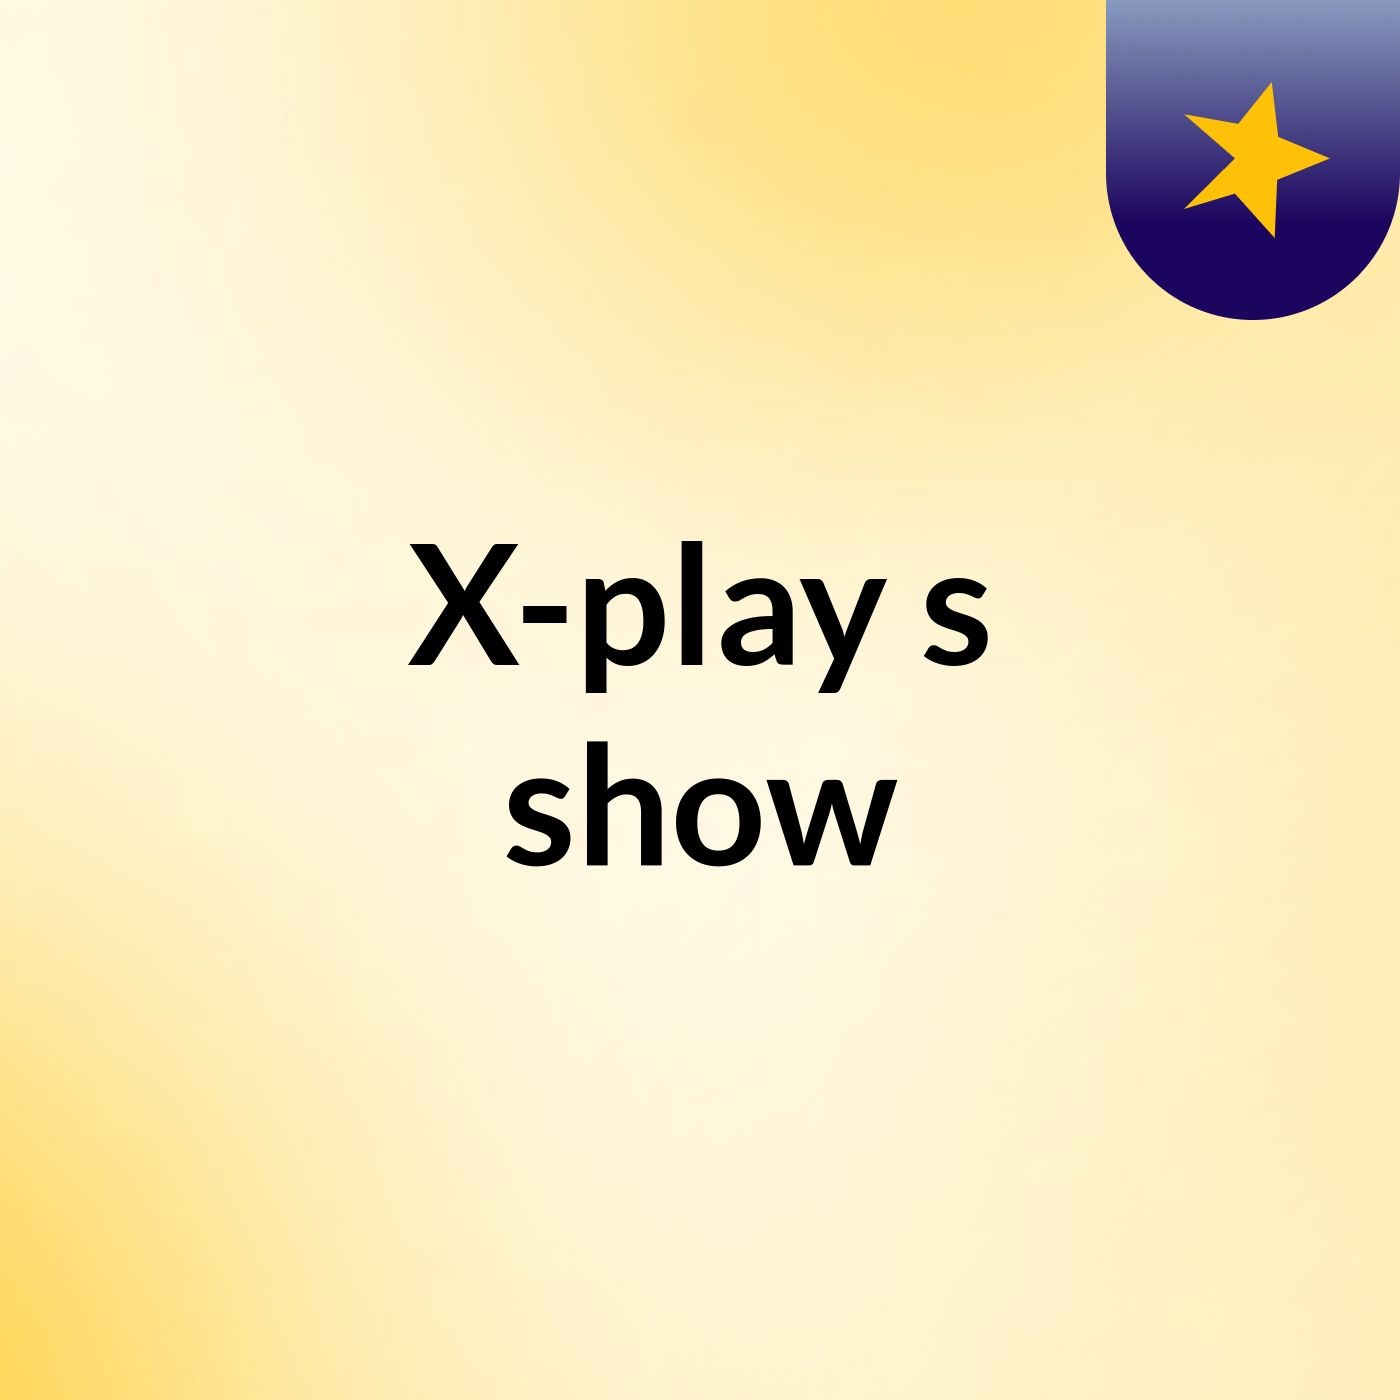 X-play's show